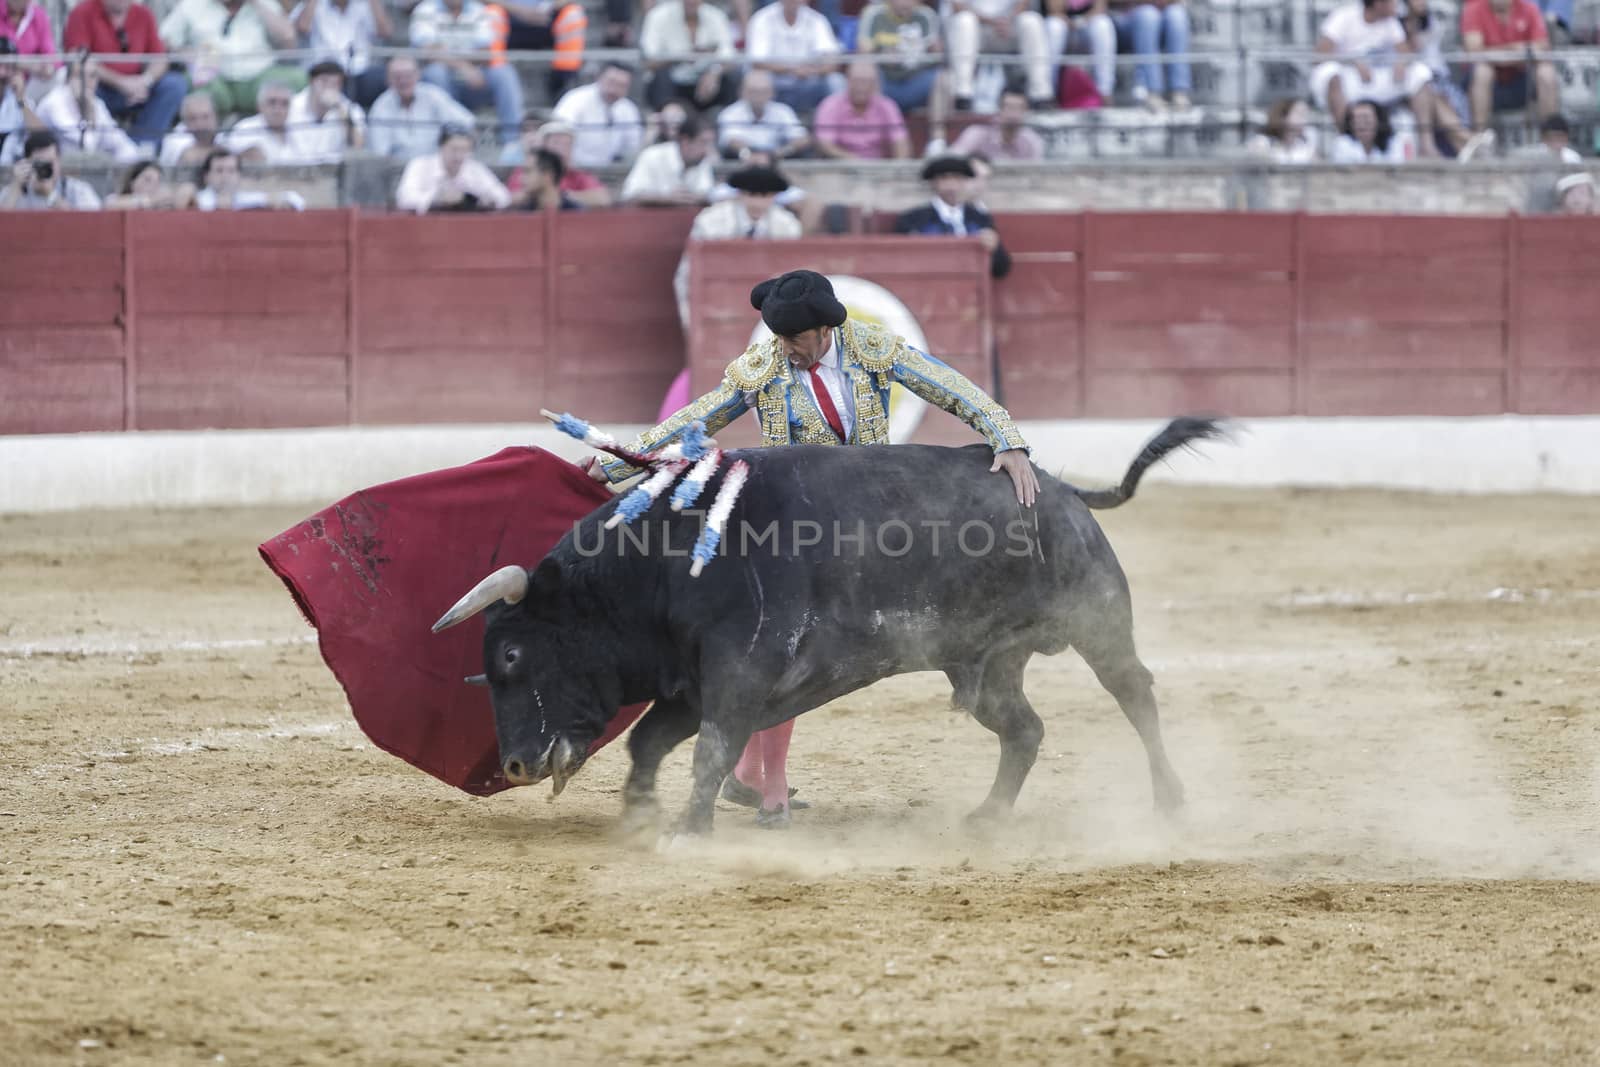 Baeza, Jaen province, SPAIN - 15 august 2009: Bullfighter Luis Francisco Espla bullfighting with a crutch in a beautiful pass in the Bullring of Baeza, Jaen province, Andalusia, Spain